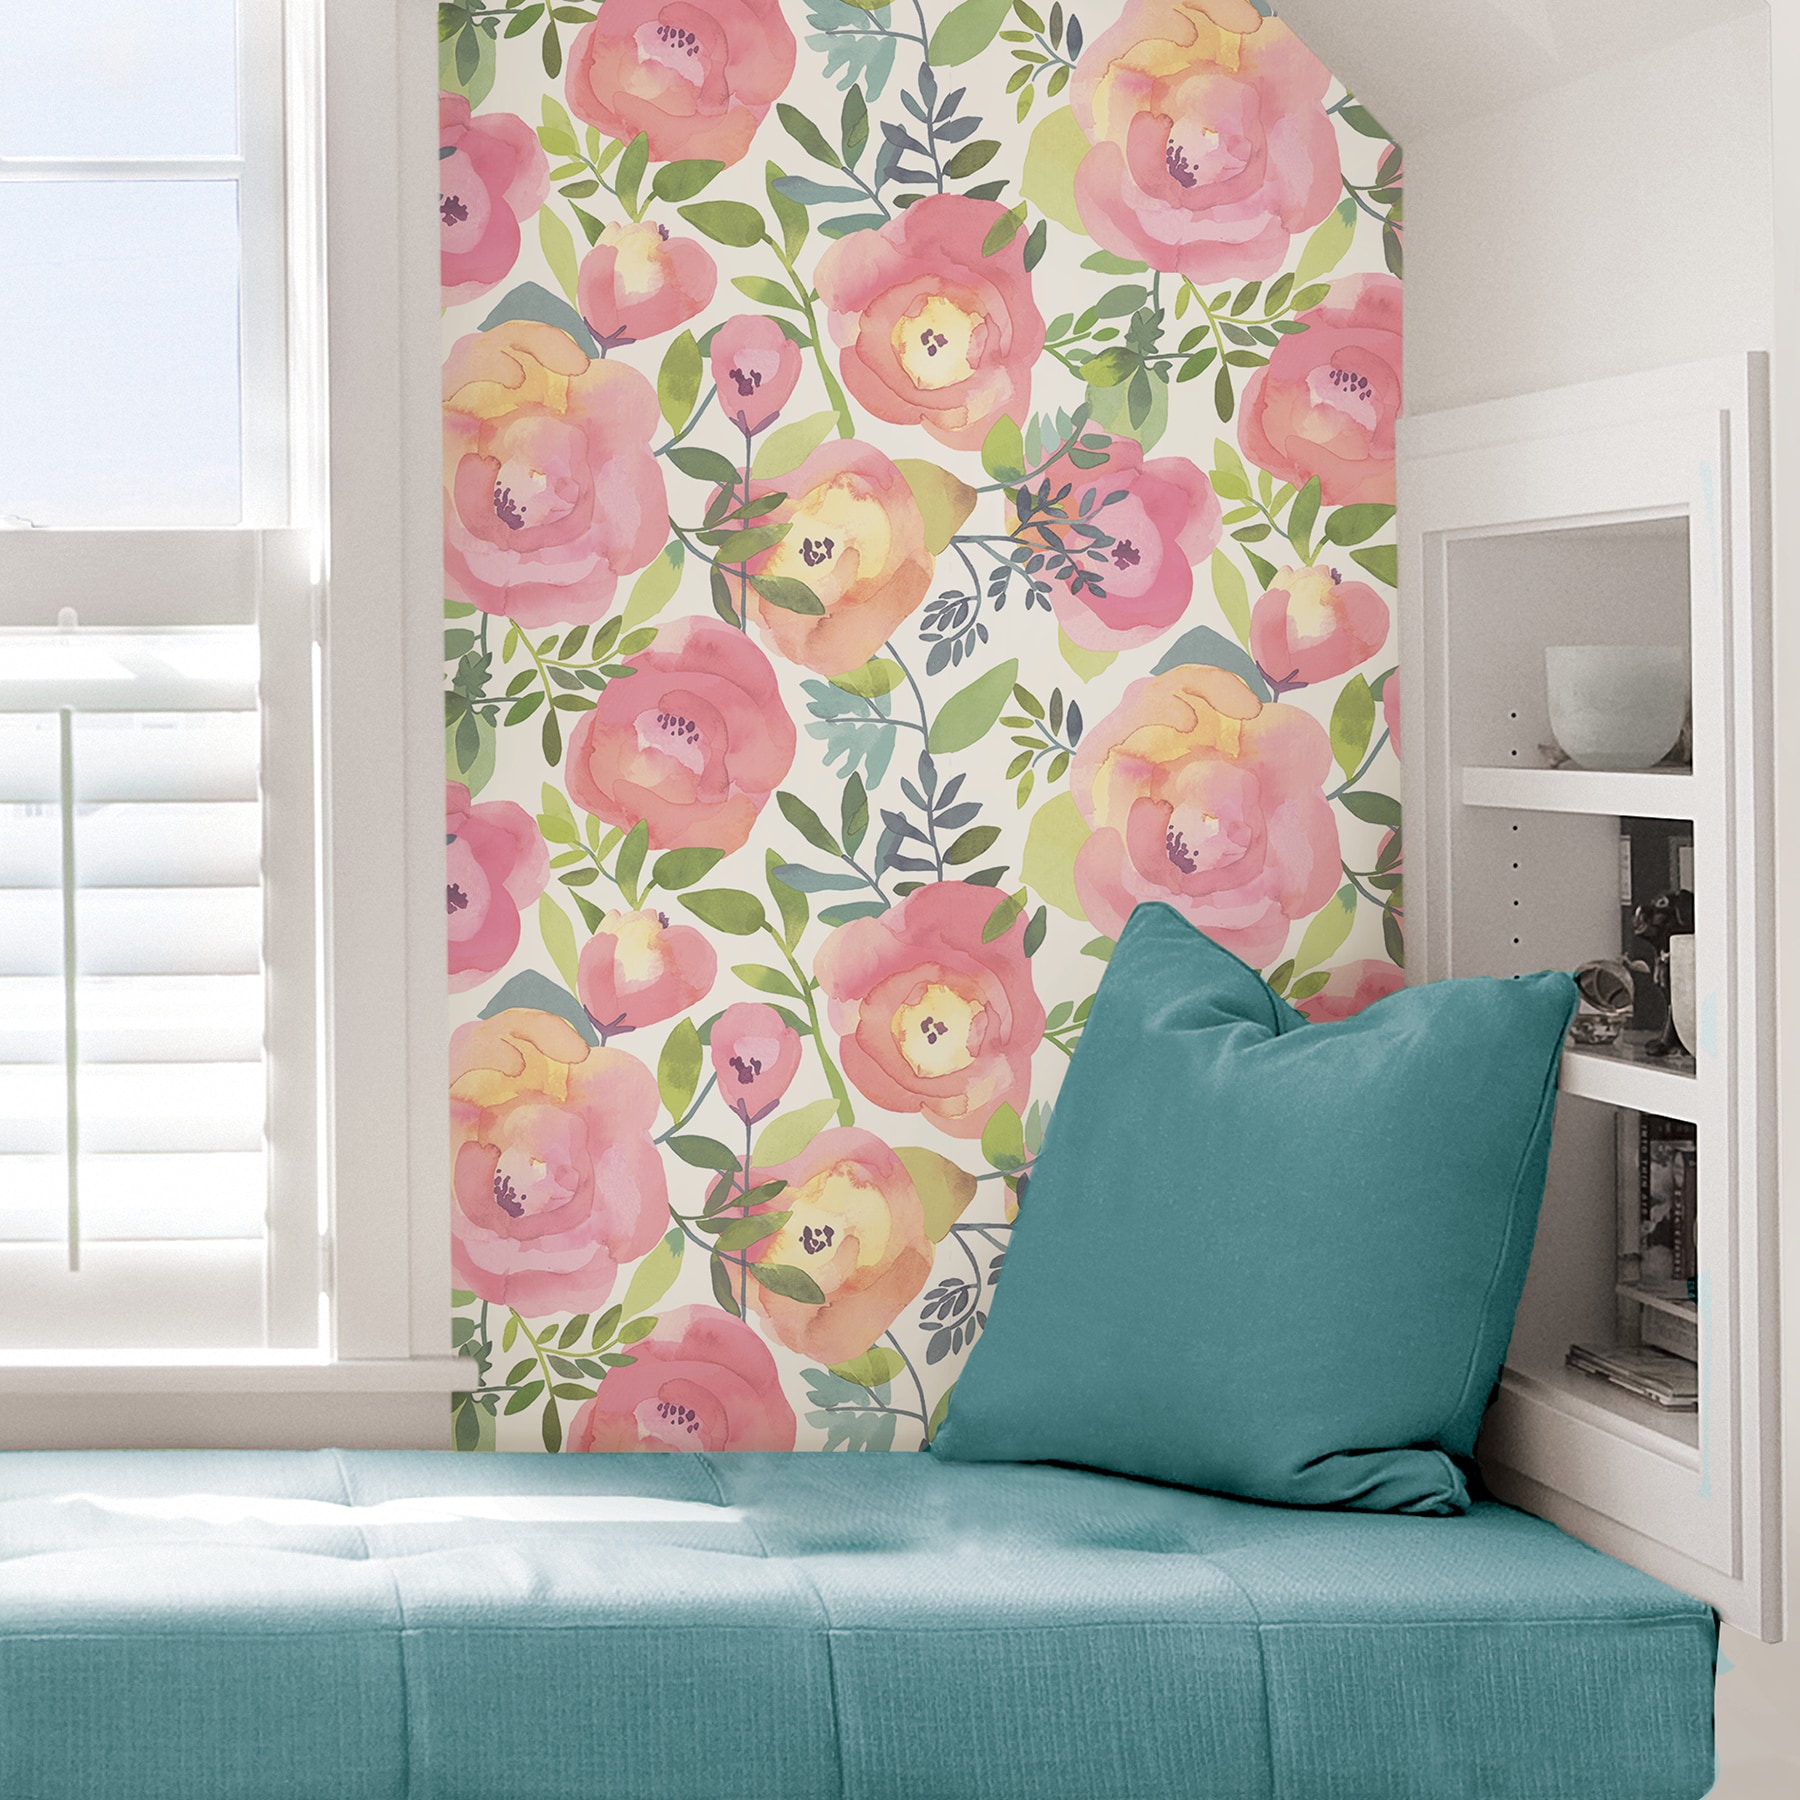 Pink Floral Hand Painted Wallpaper / Peel and Stick Wallpaper Removable  Wallpaper Home Decor Wall Art Wall Decor Room Decor - C902